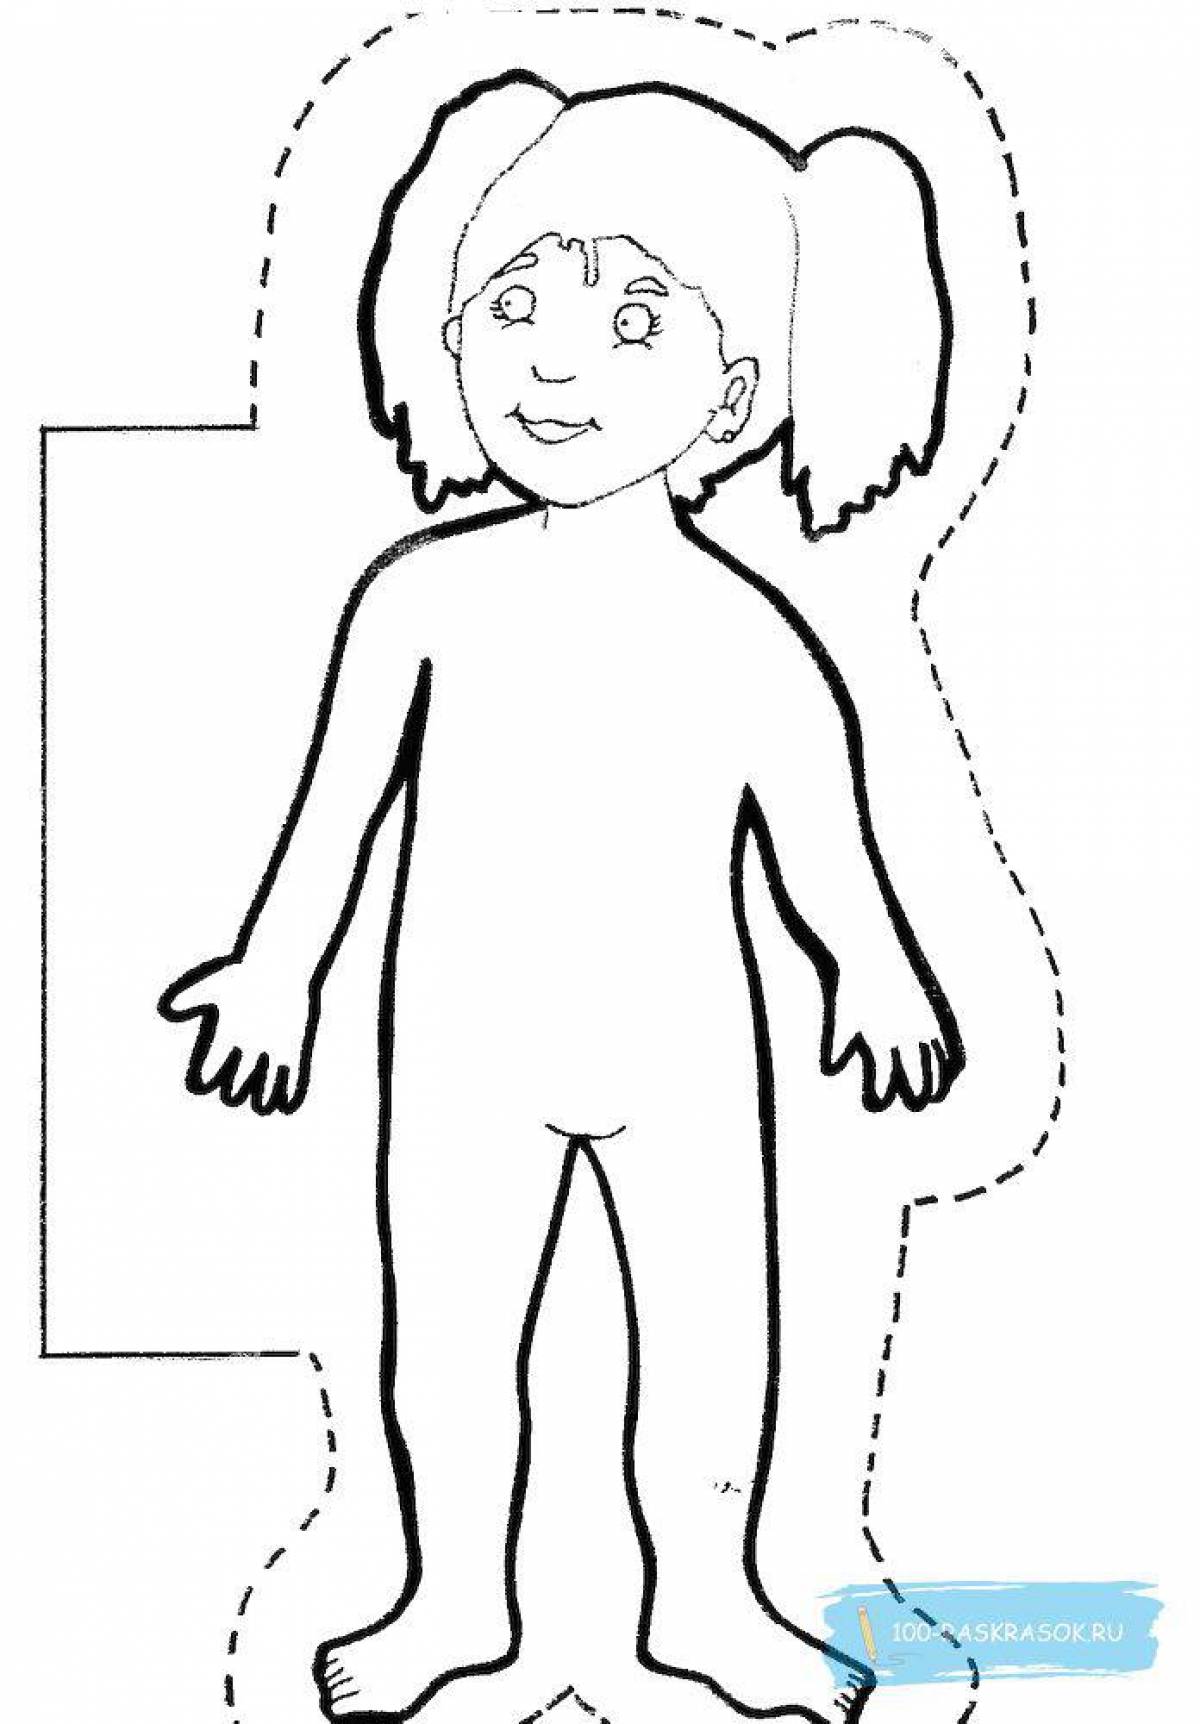 Coloring page of body parts for kids